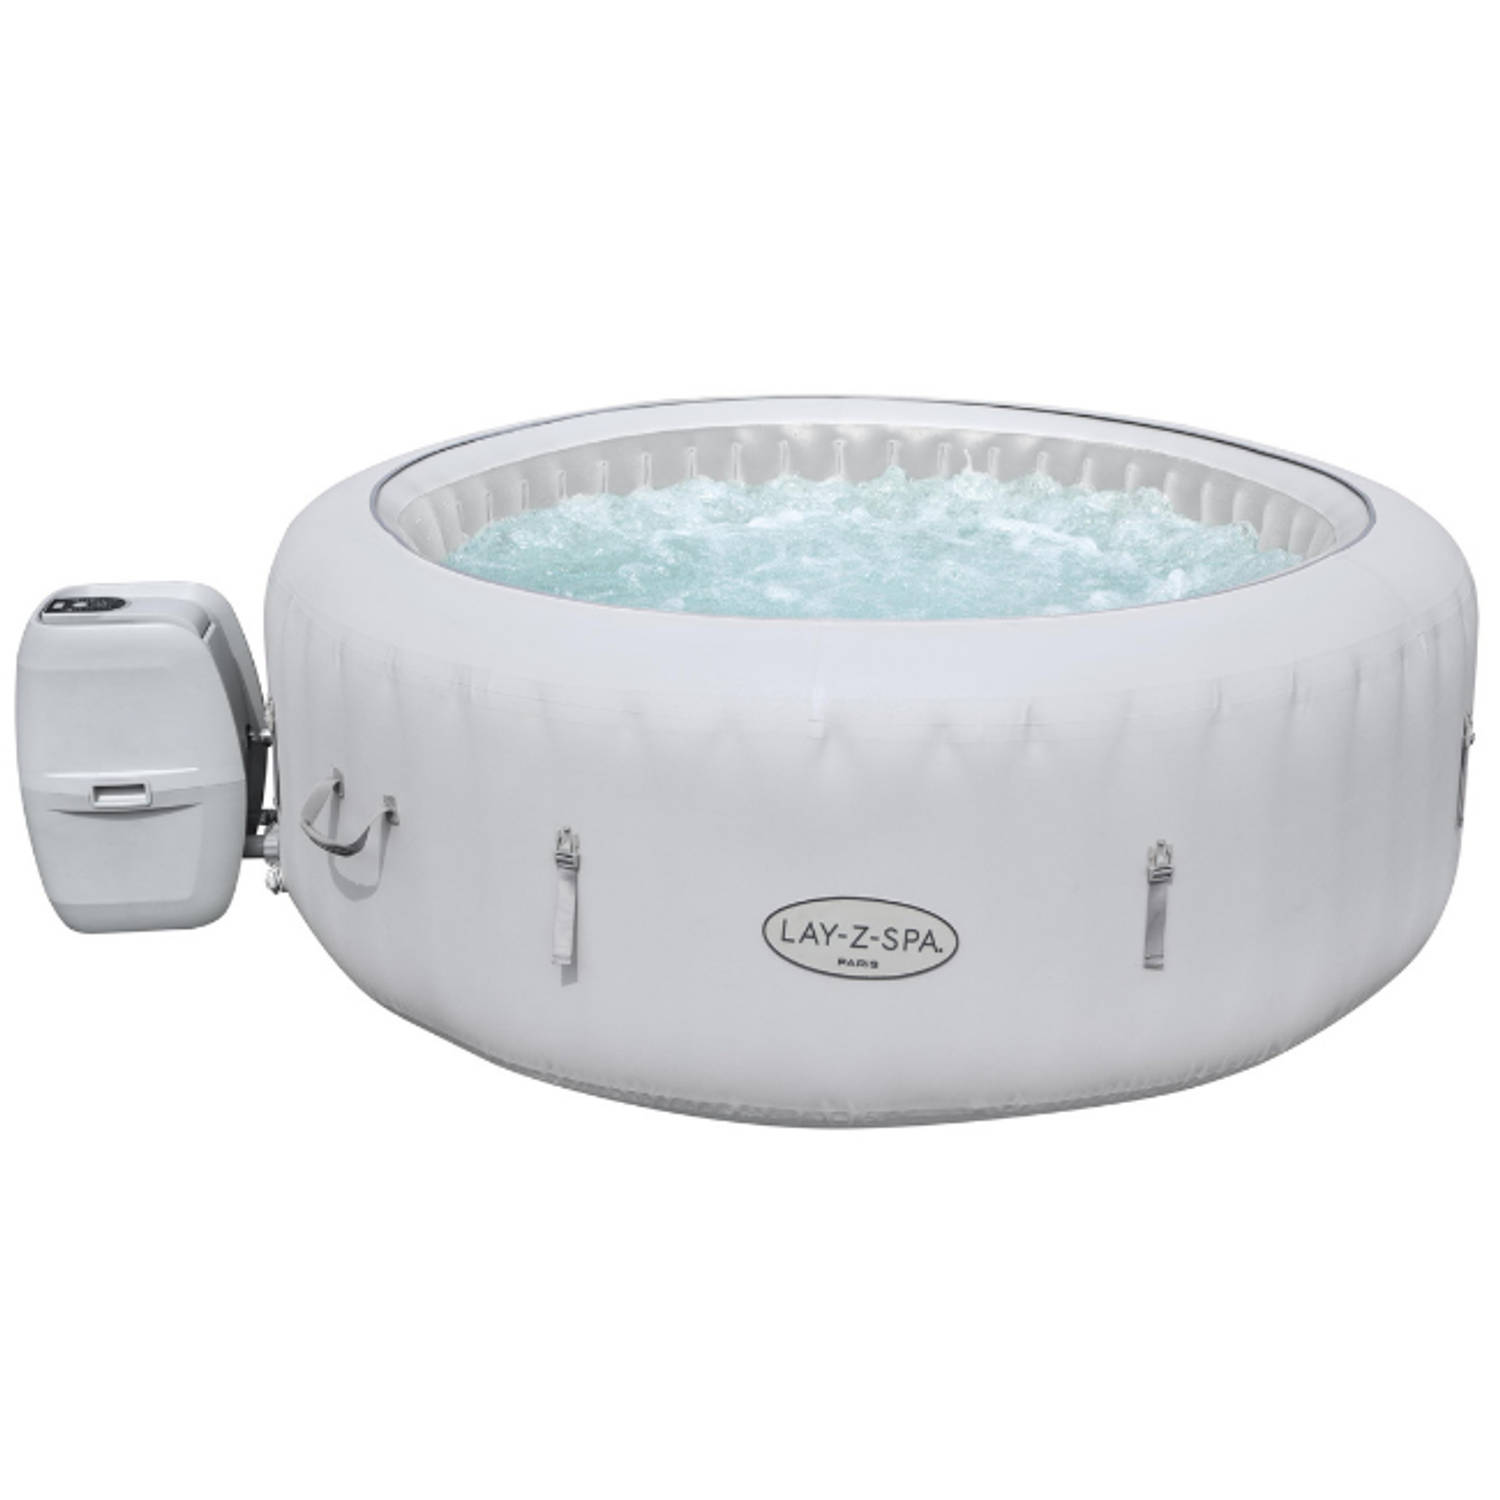 Lay-z-spa Paris Led Max 6 Pers 140 Airjets Jacuzzi Bubbelbad- Whirlpool Copy